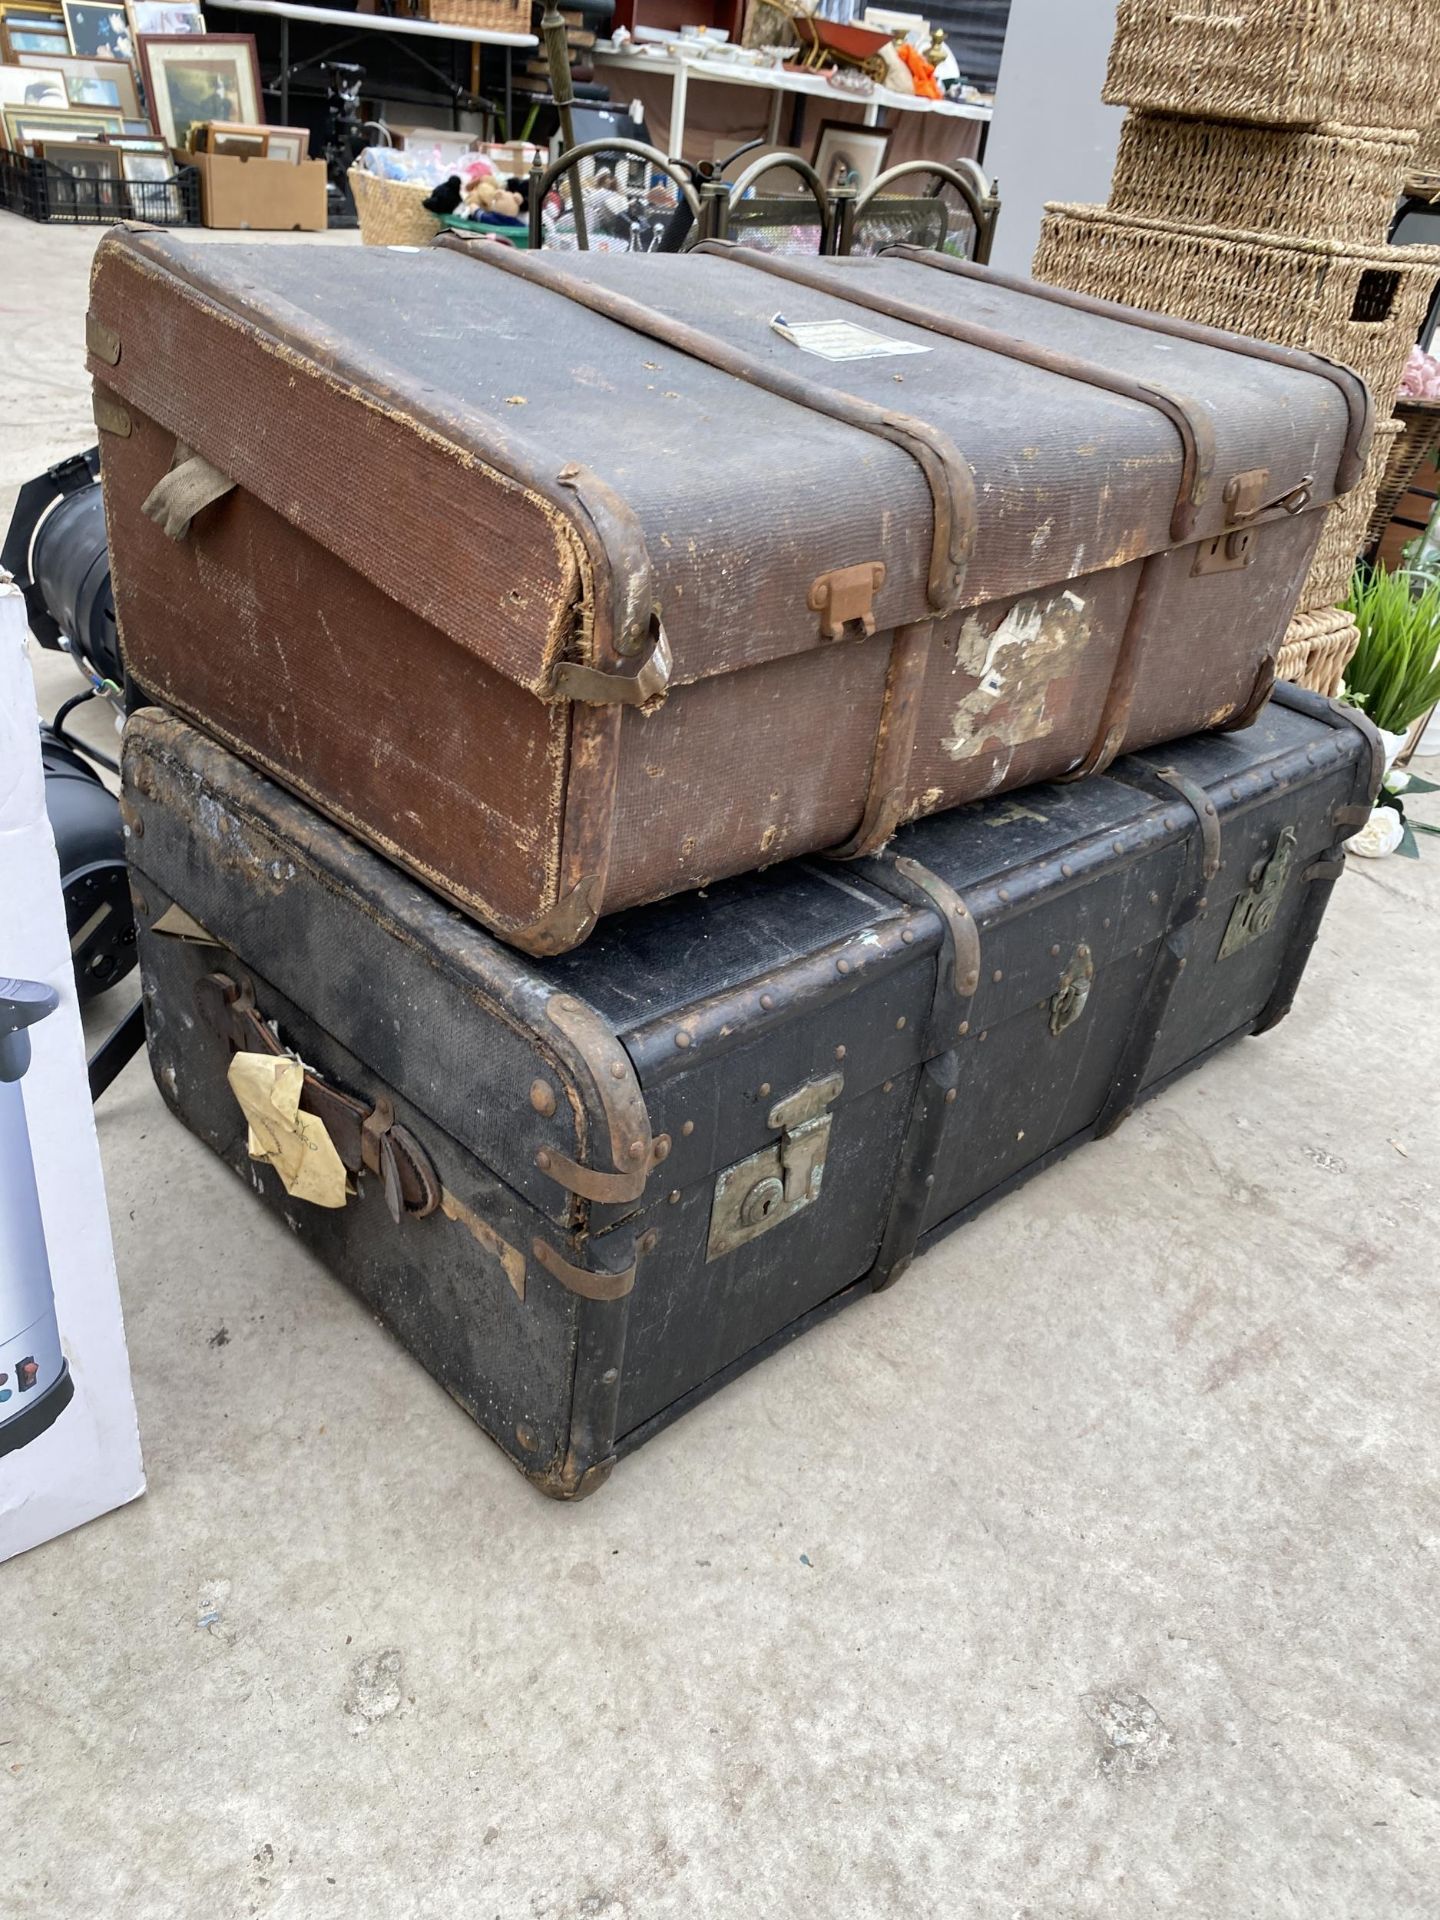 TWO HARD VINTAGE TRAVEL CASES - Image 2 of 2